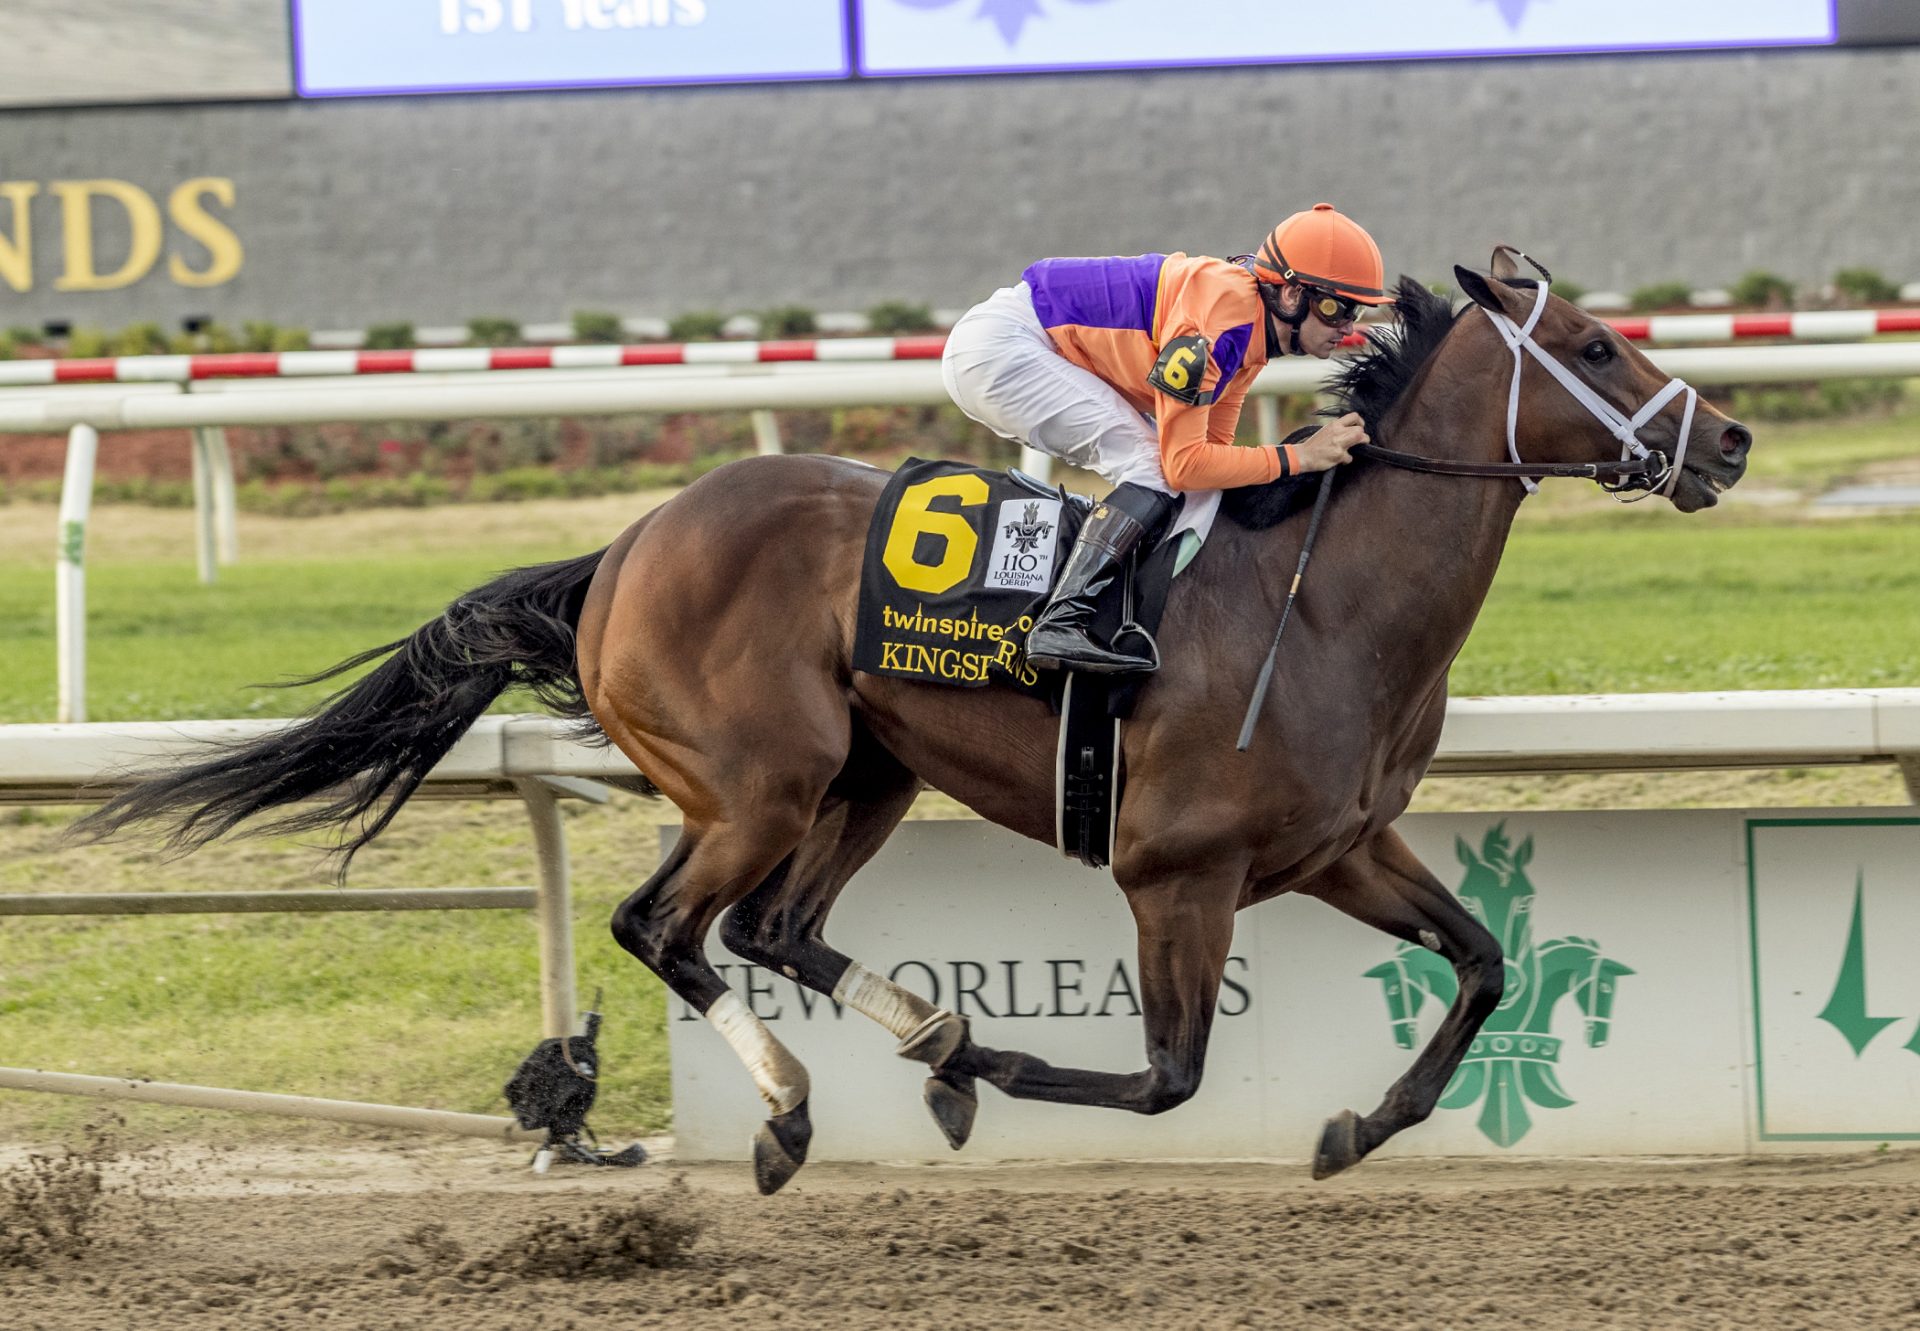 Kingsbarns (Uncle Mo) Wins Gr 2 Louisiana Derby at Fair Grounds